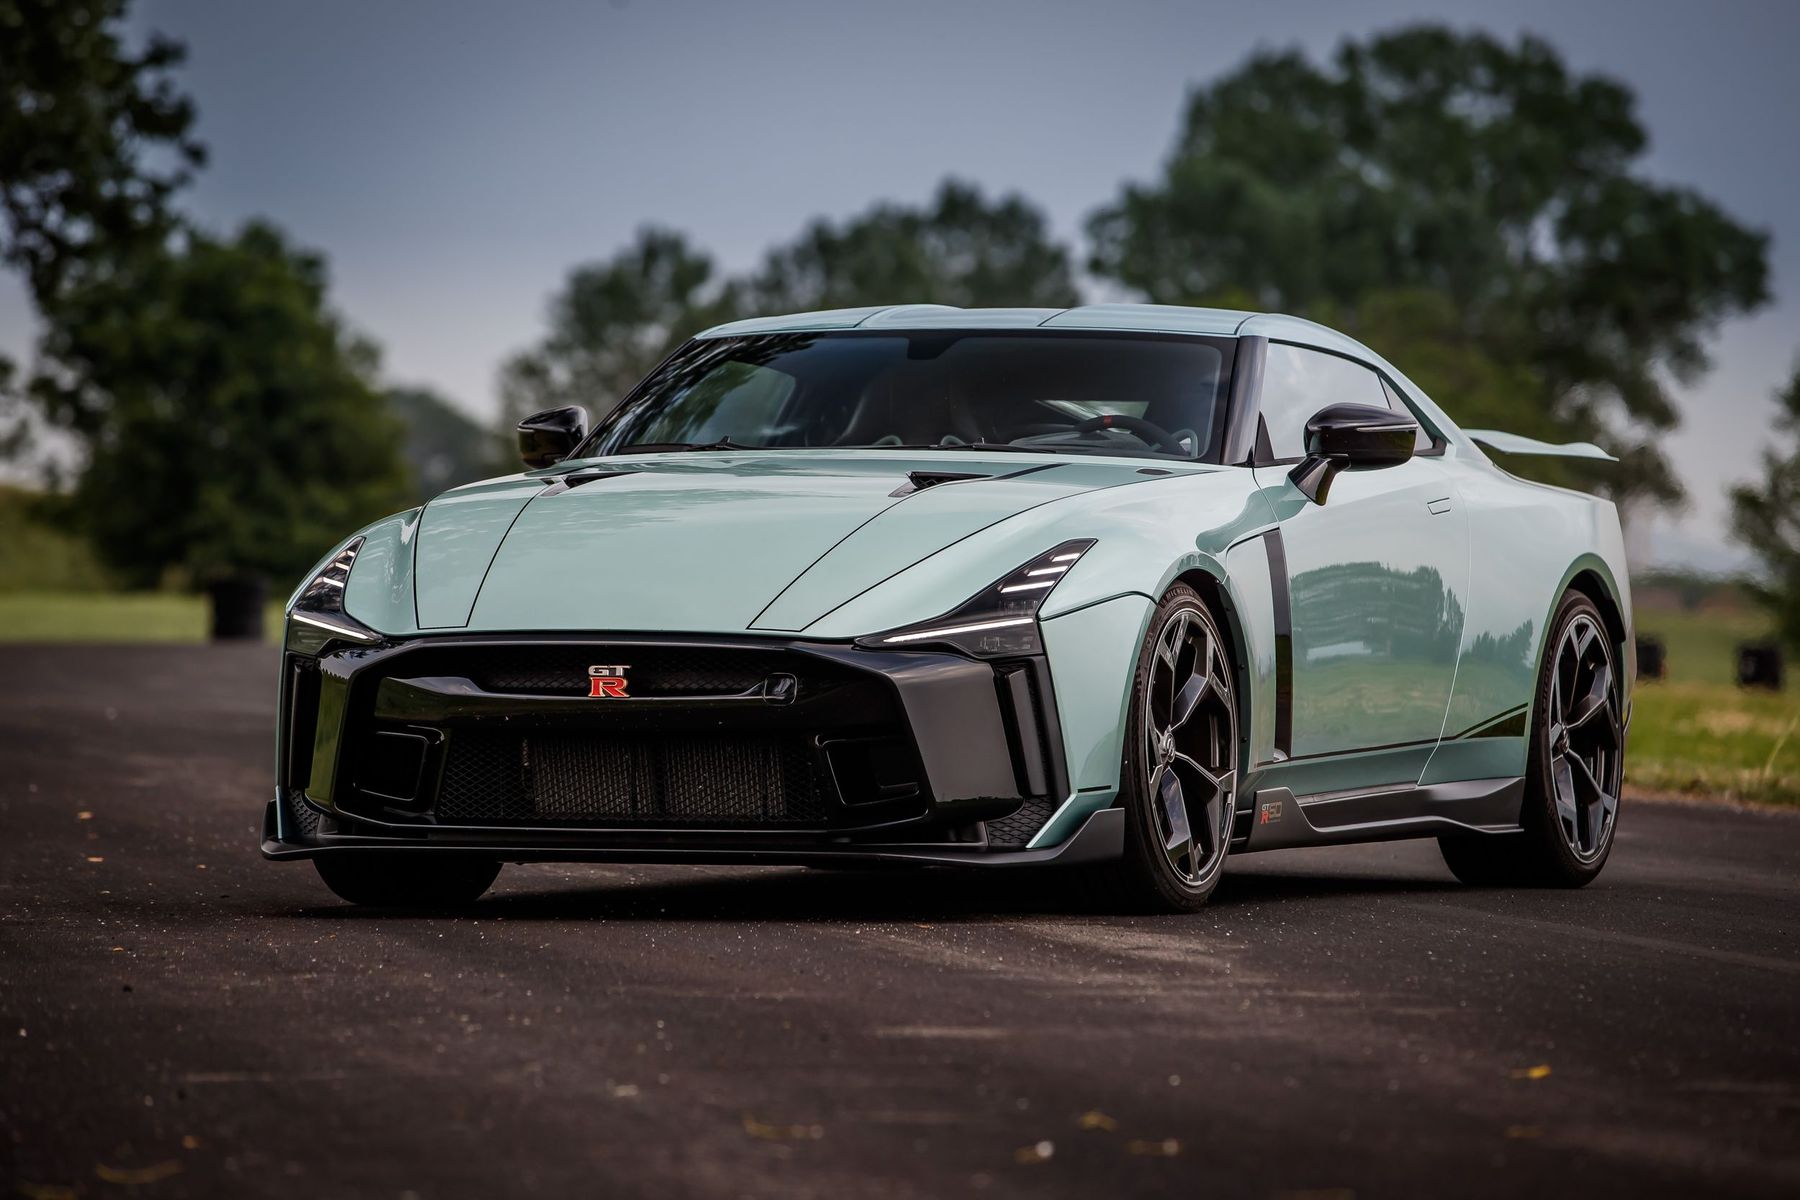 Nissan GT-R50 by Italdesign 2021. Bodywork, Exterior. Coupe, 1 generation